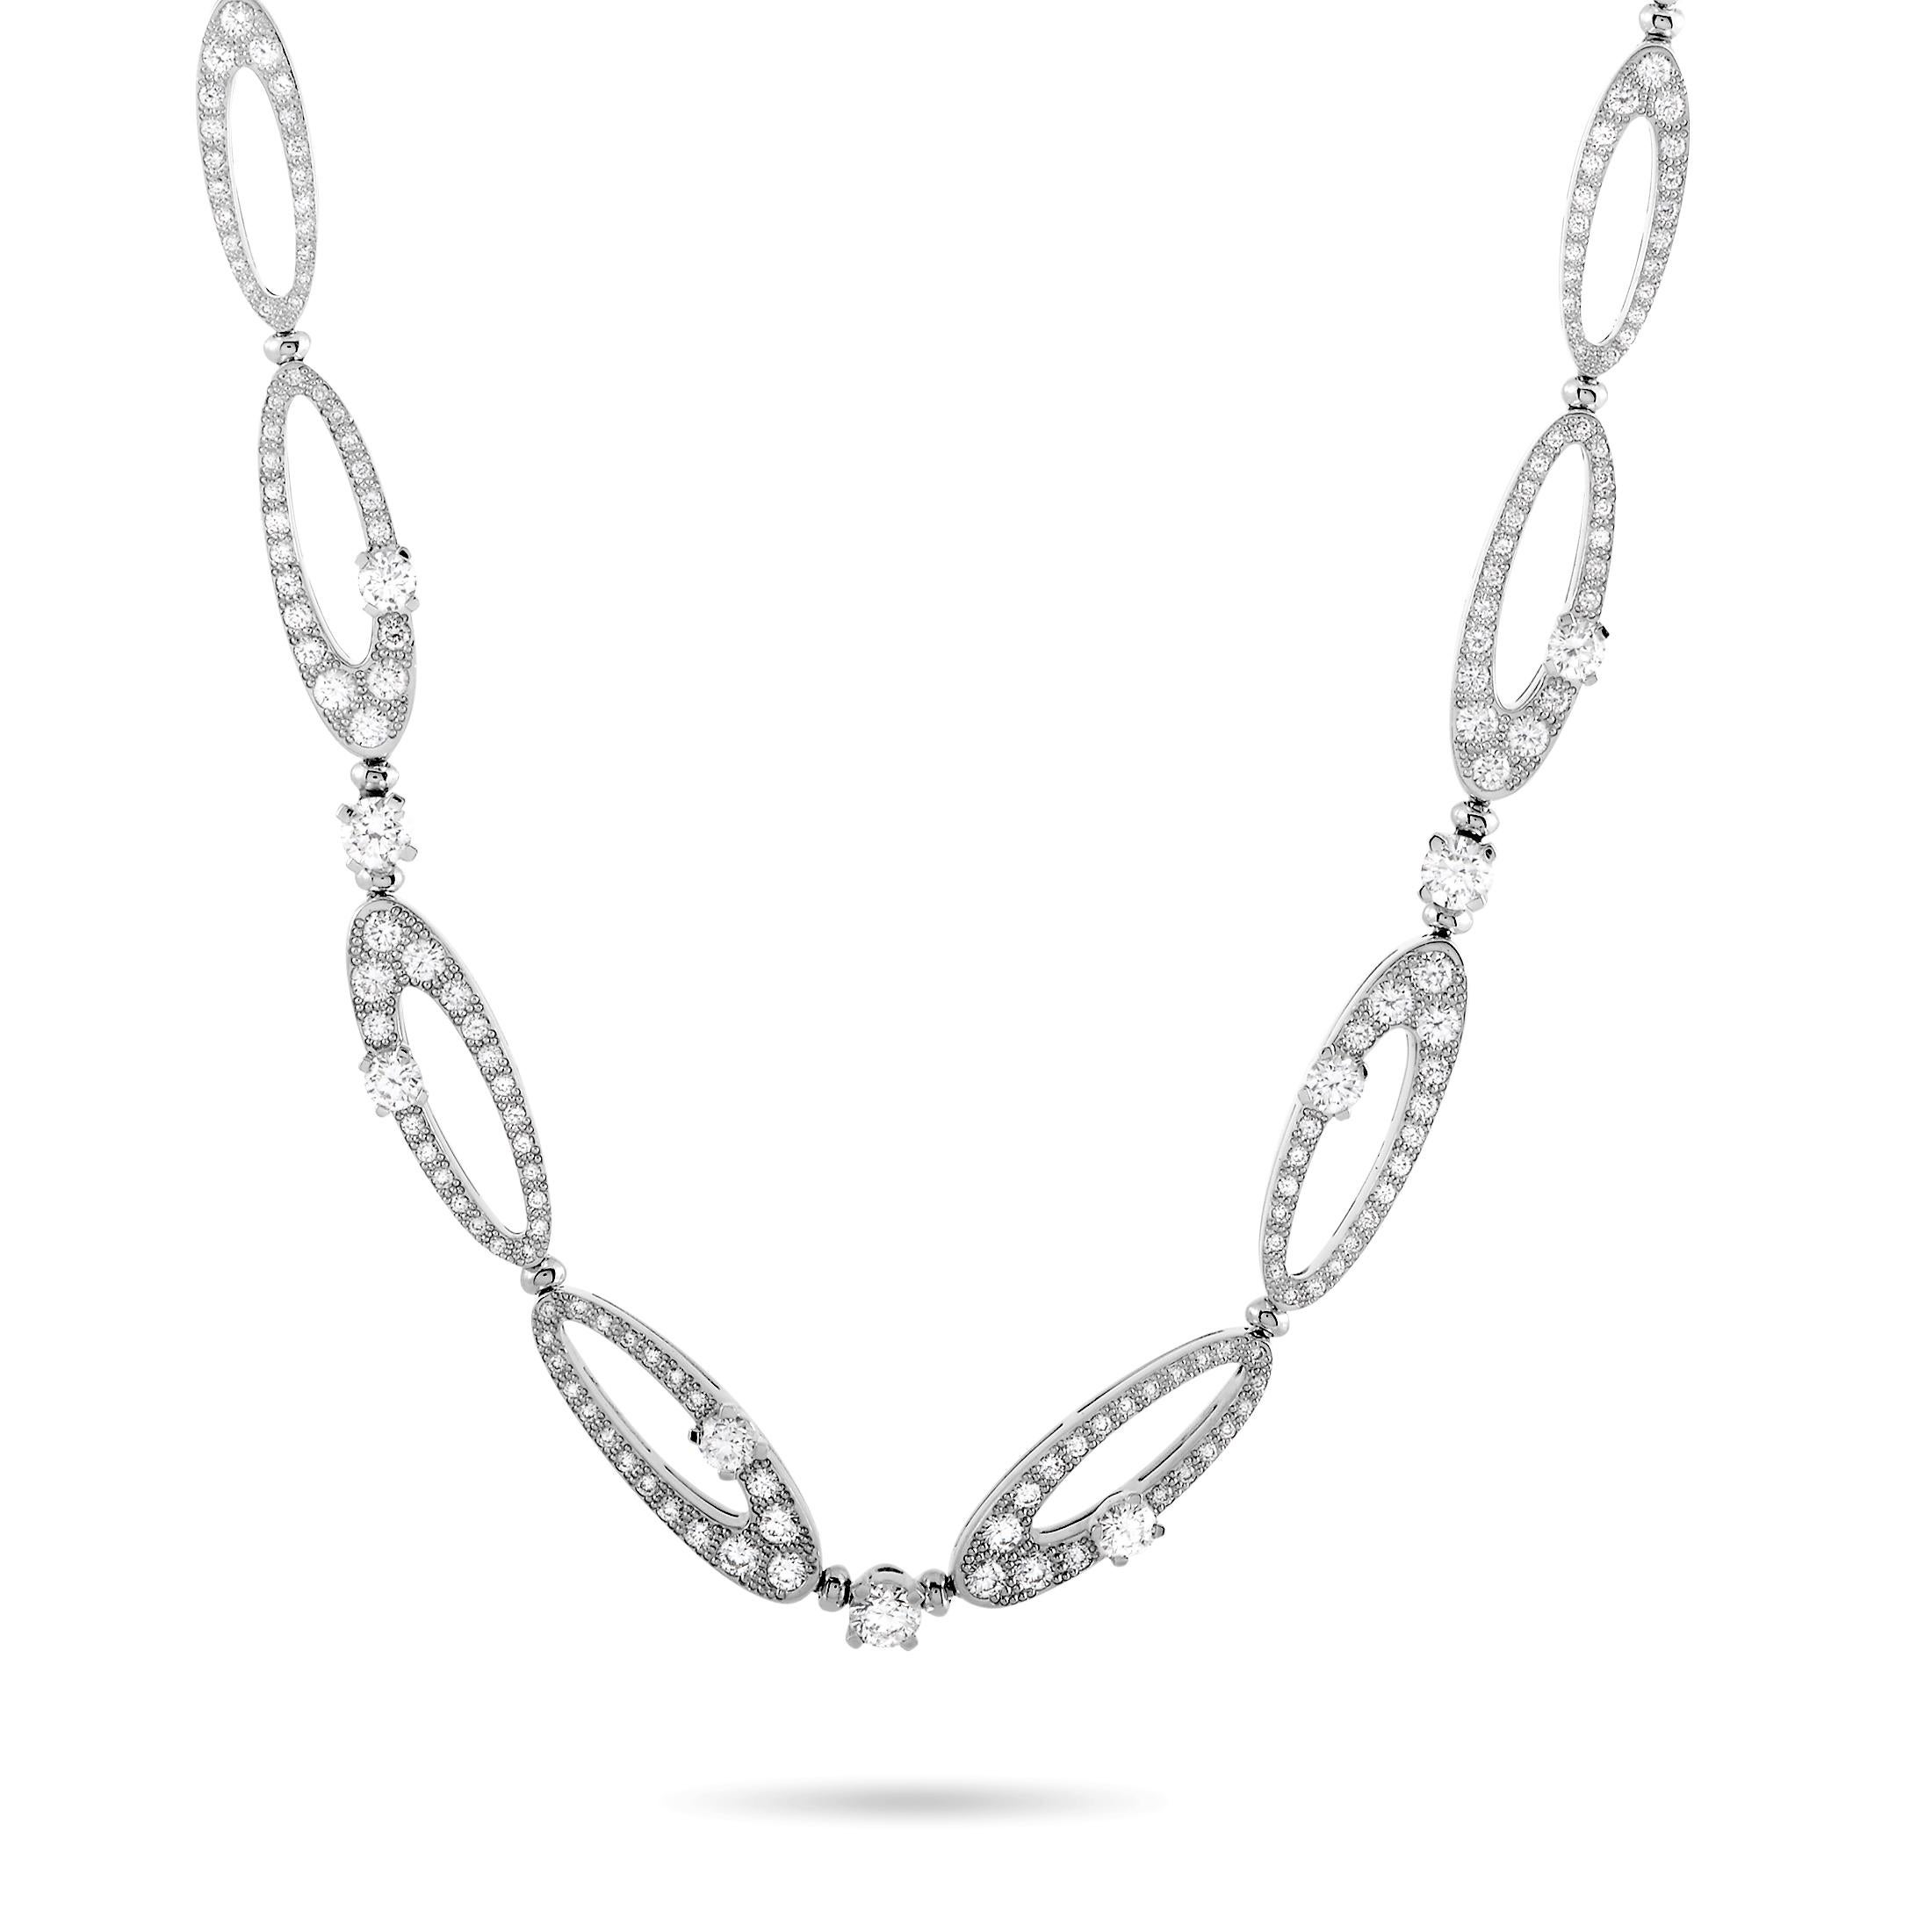 The “Elisia” set by Bvlgari includes a necklace, a pair of earrings, and a ring that are crafted from 18K white gold and set with diamonds.

The necklace weighs 38.7 grams, measures 18.00” in length, and boasts a total of approximately 6.50 carats